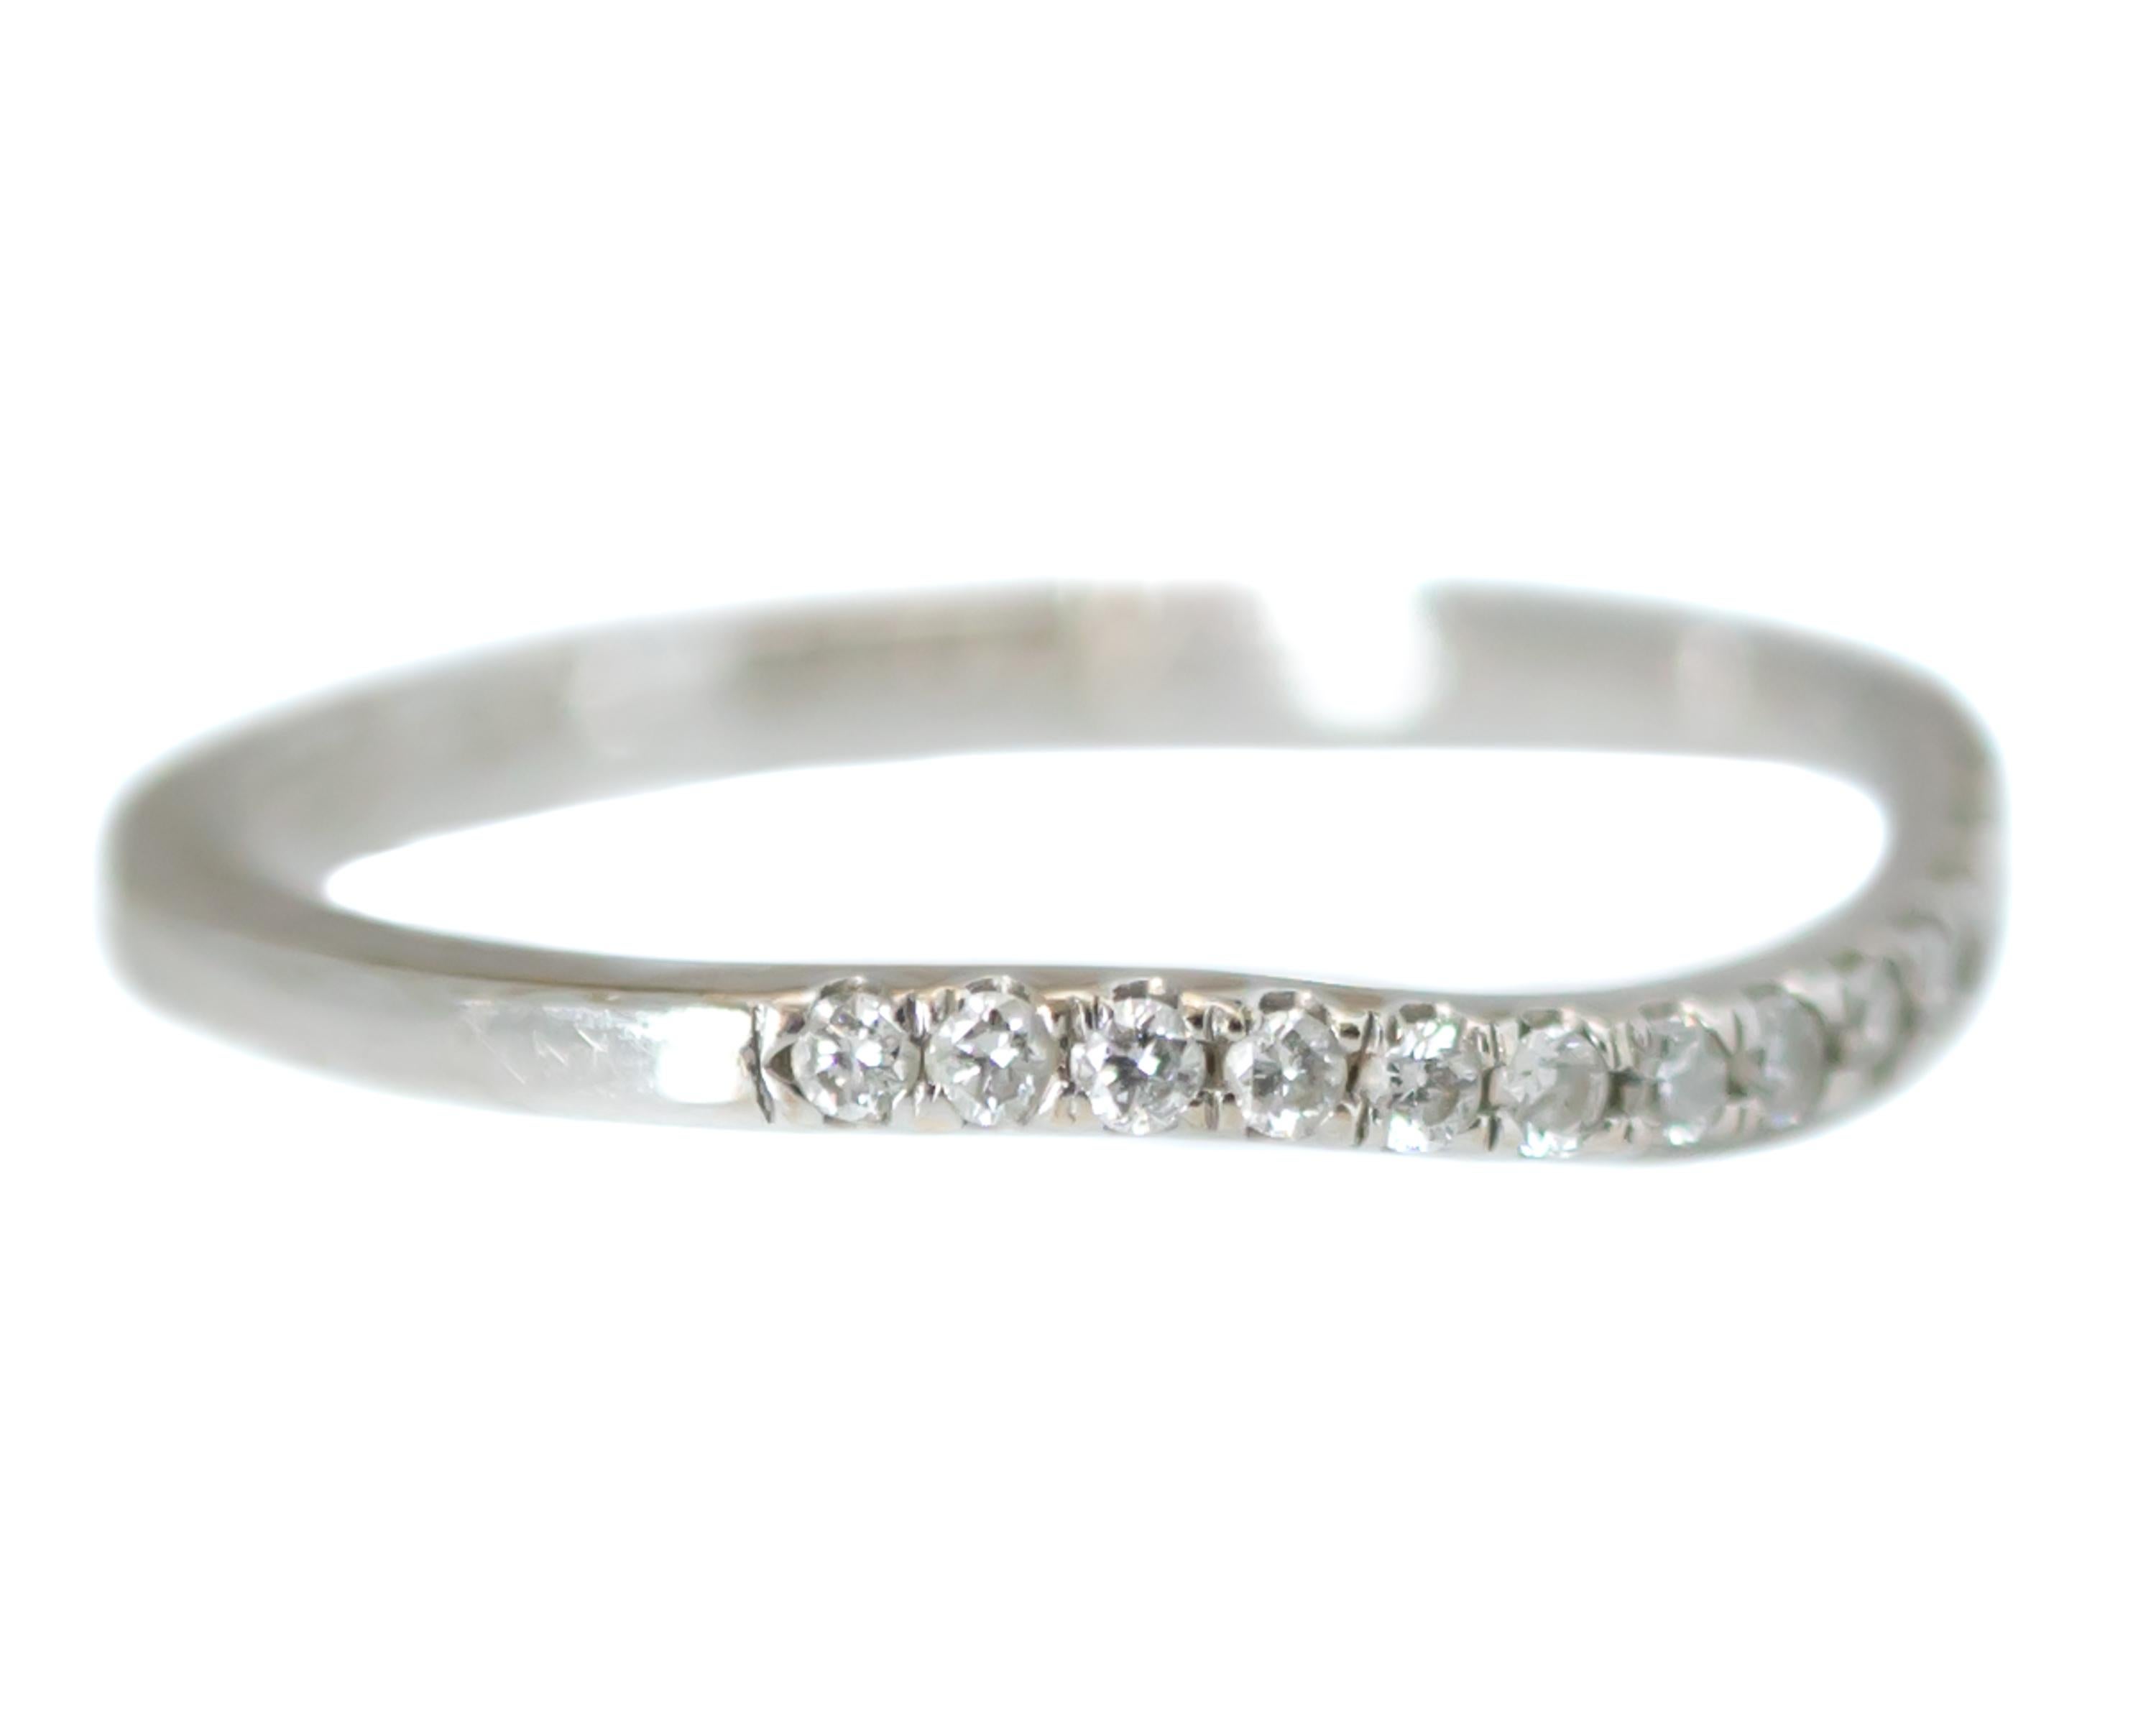 Curved Wedding Band - 18 Karat White Gold, Diamonds

Features: 
0.15 carat total Round Brilliant Diamonds
18 Karat White Gold setting
Curved front to accommodate an engagement ring
Prong set stones
1.5 millimeter wide band
2 millimeters finger to